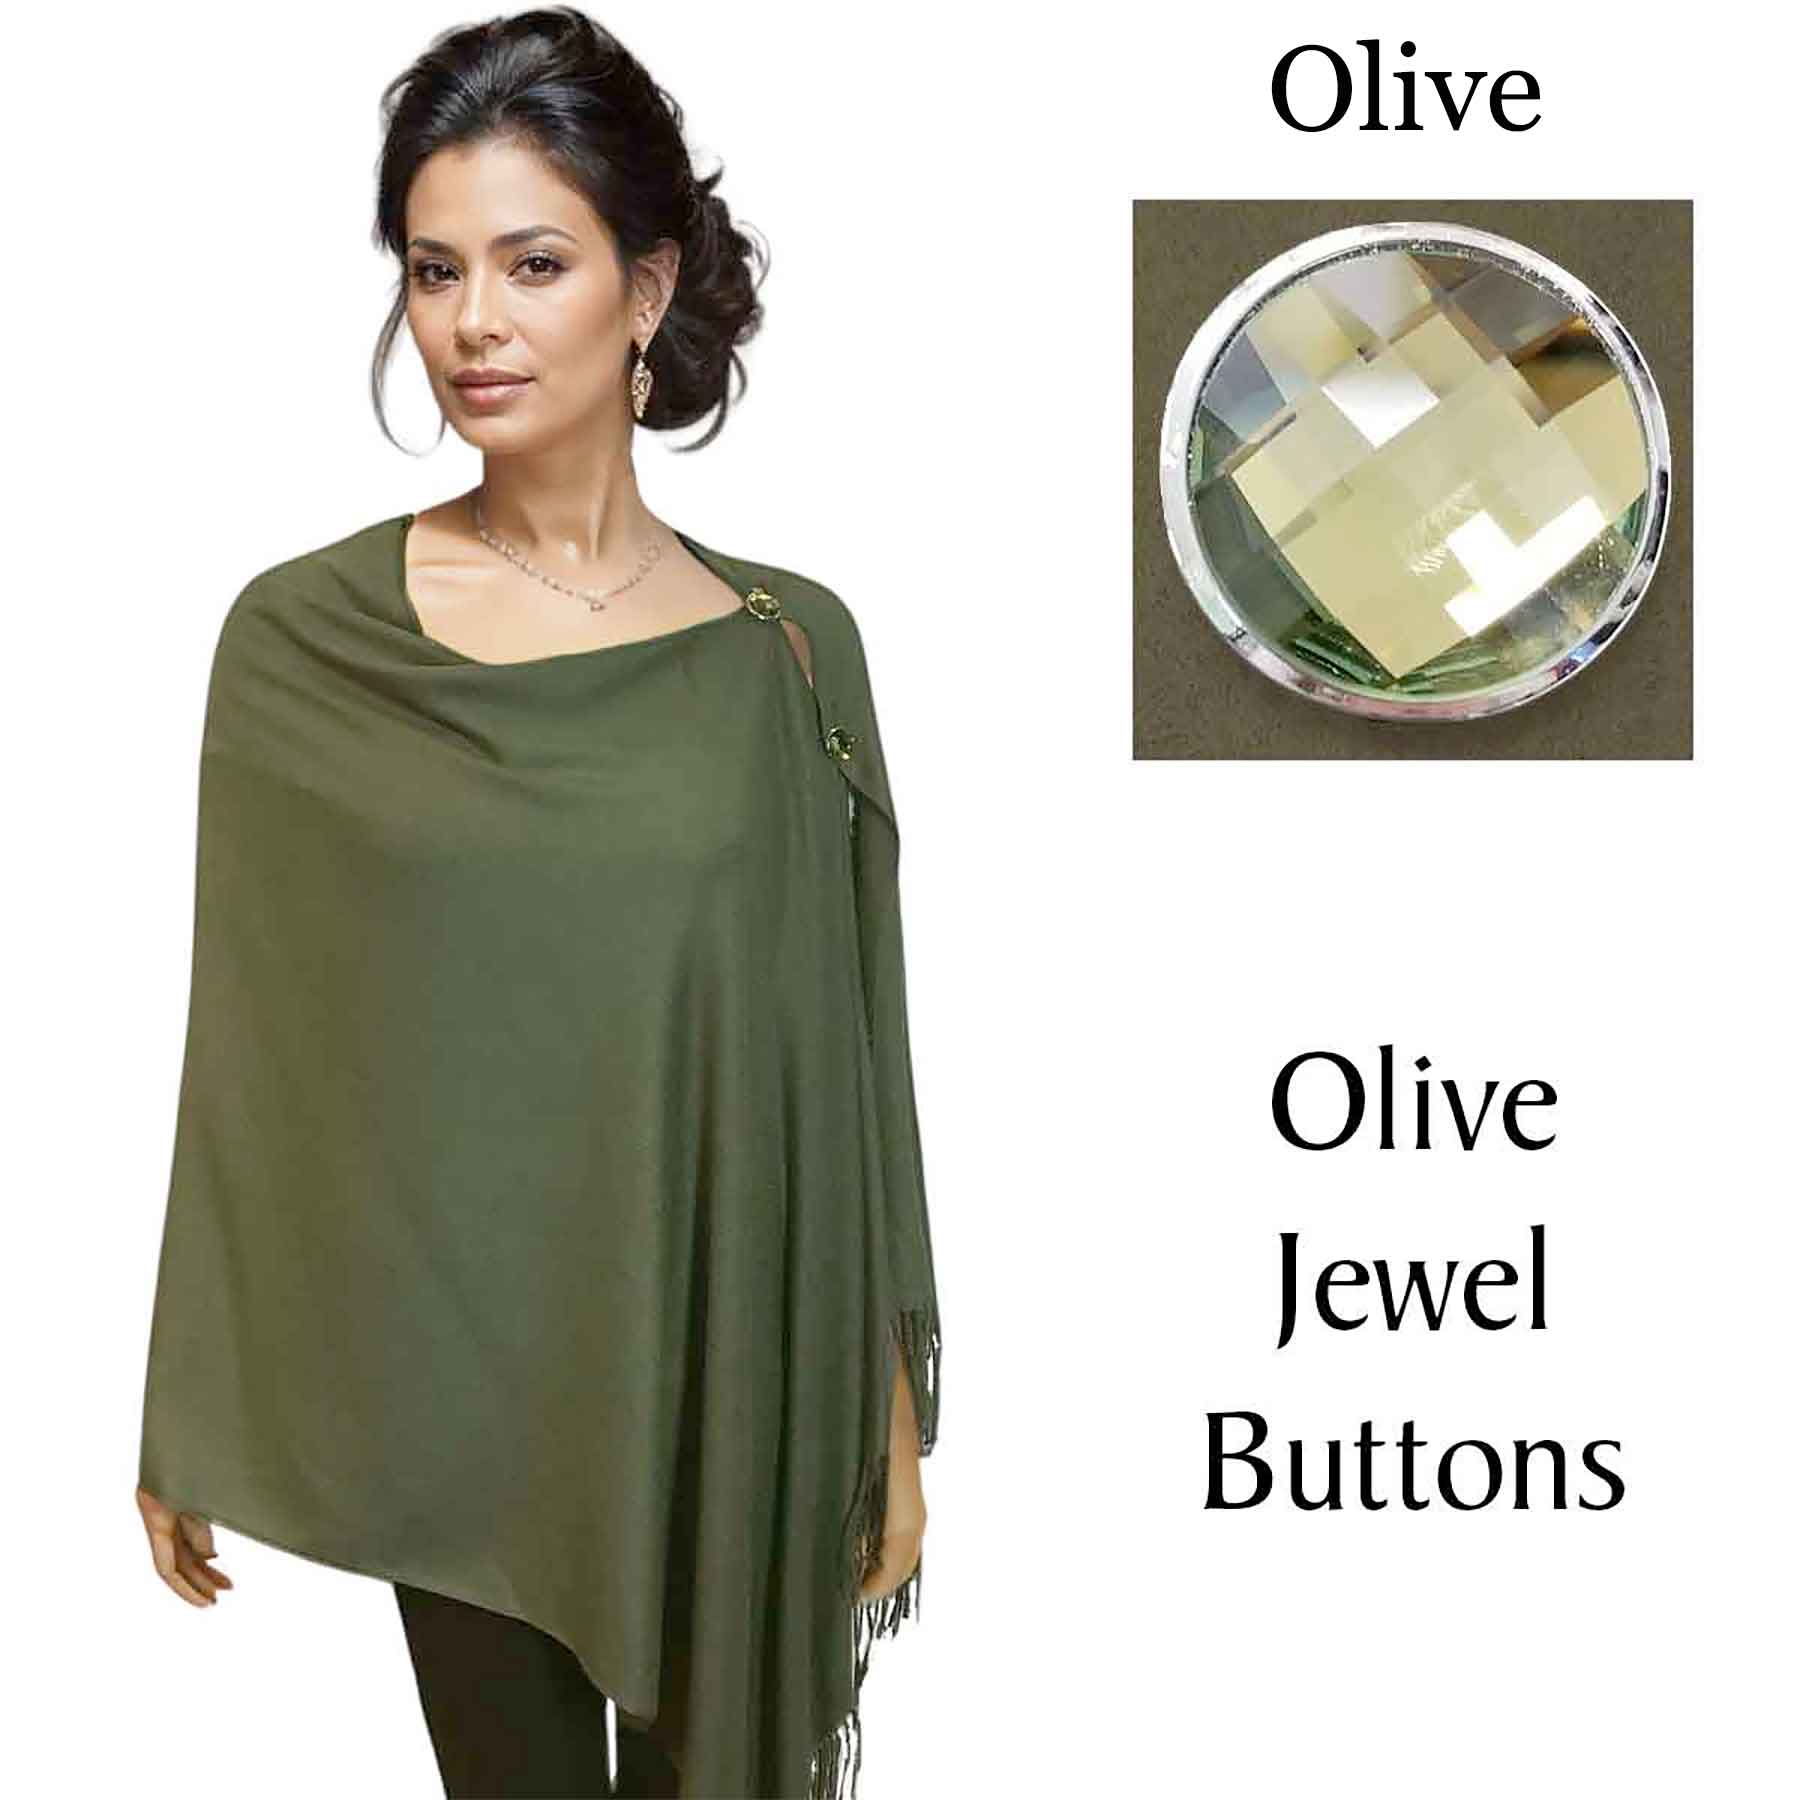 #23 Olive with Olive Jewel Buttons